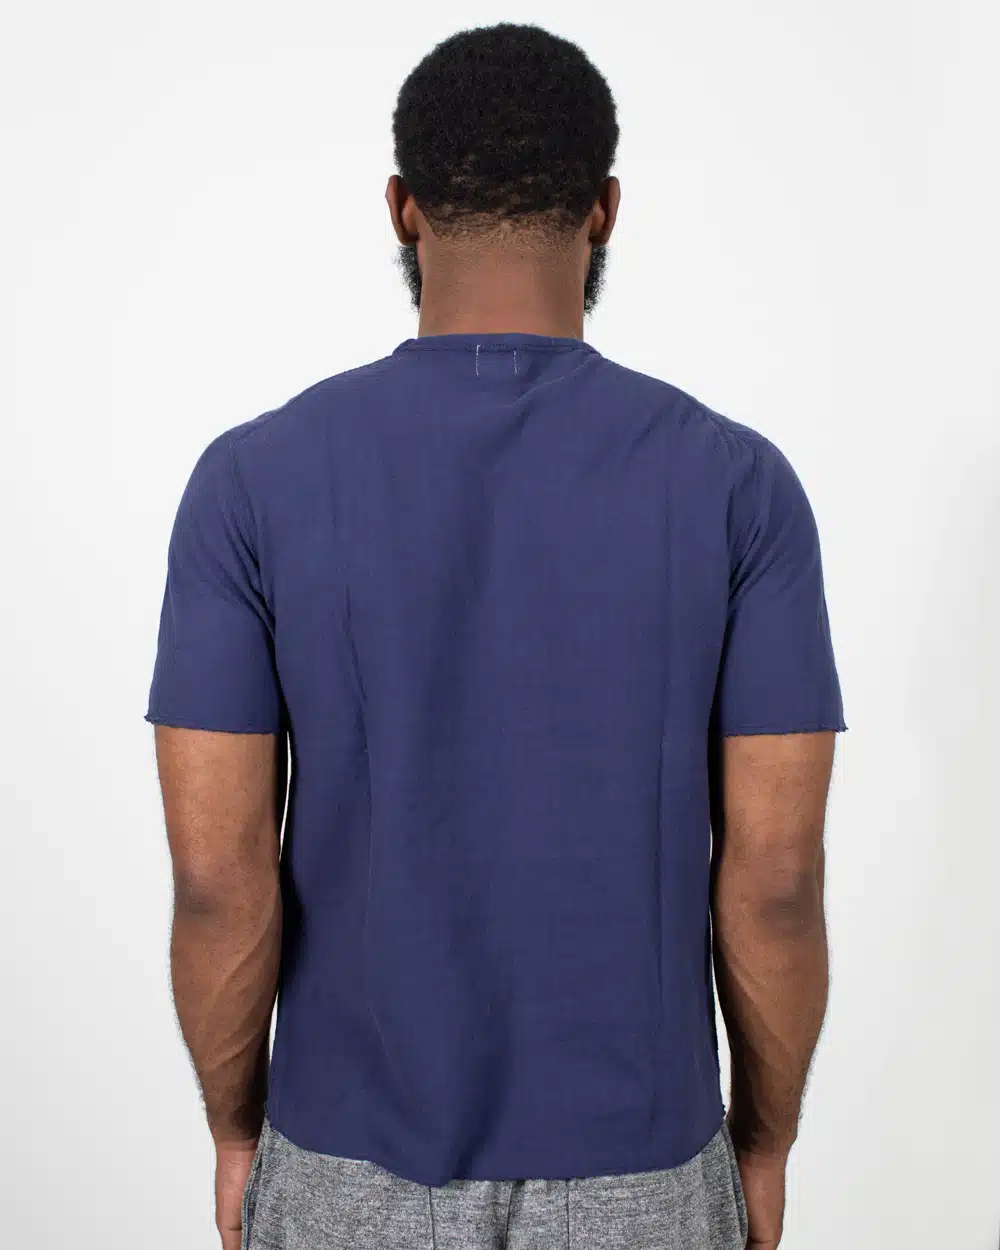 Loop & Weft Dual Layered Knit Raw Edge Crewneck - French Navy Blue